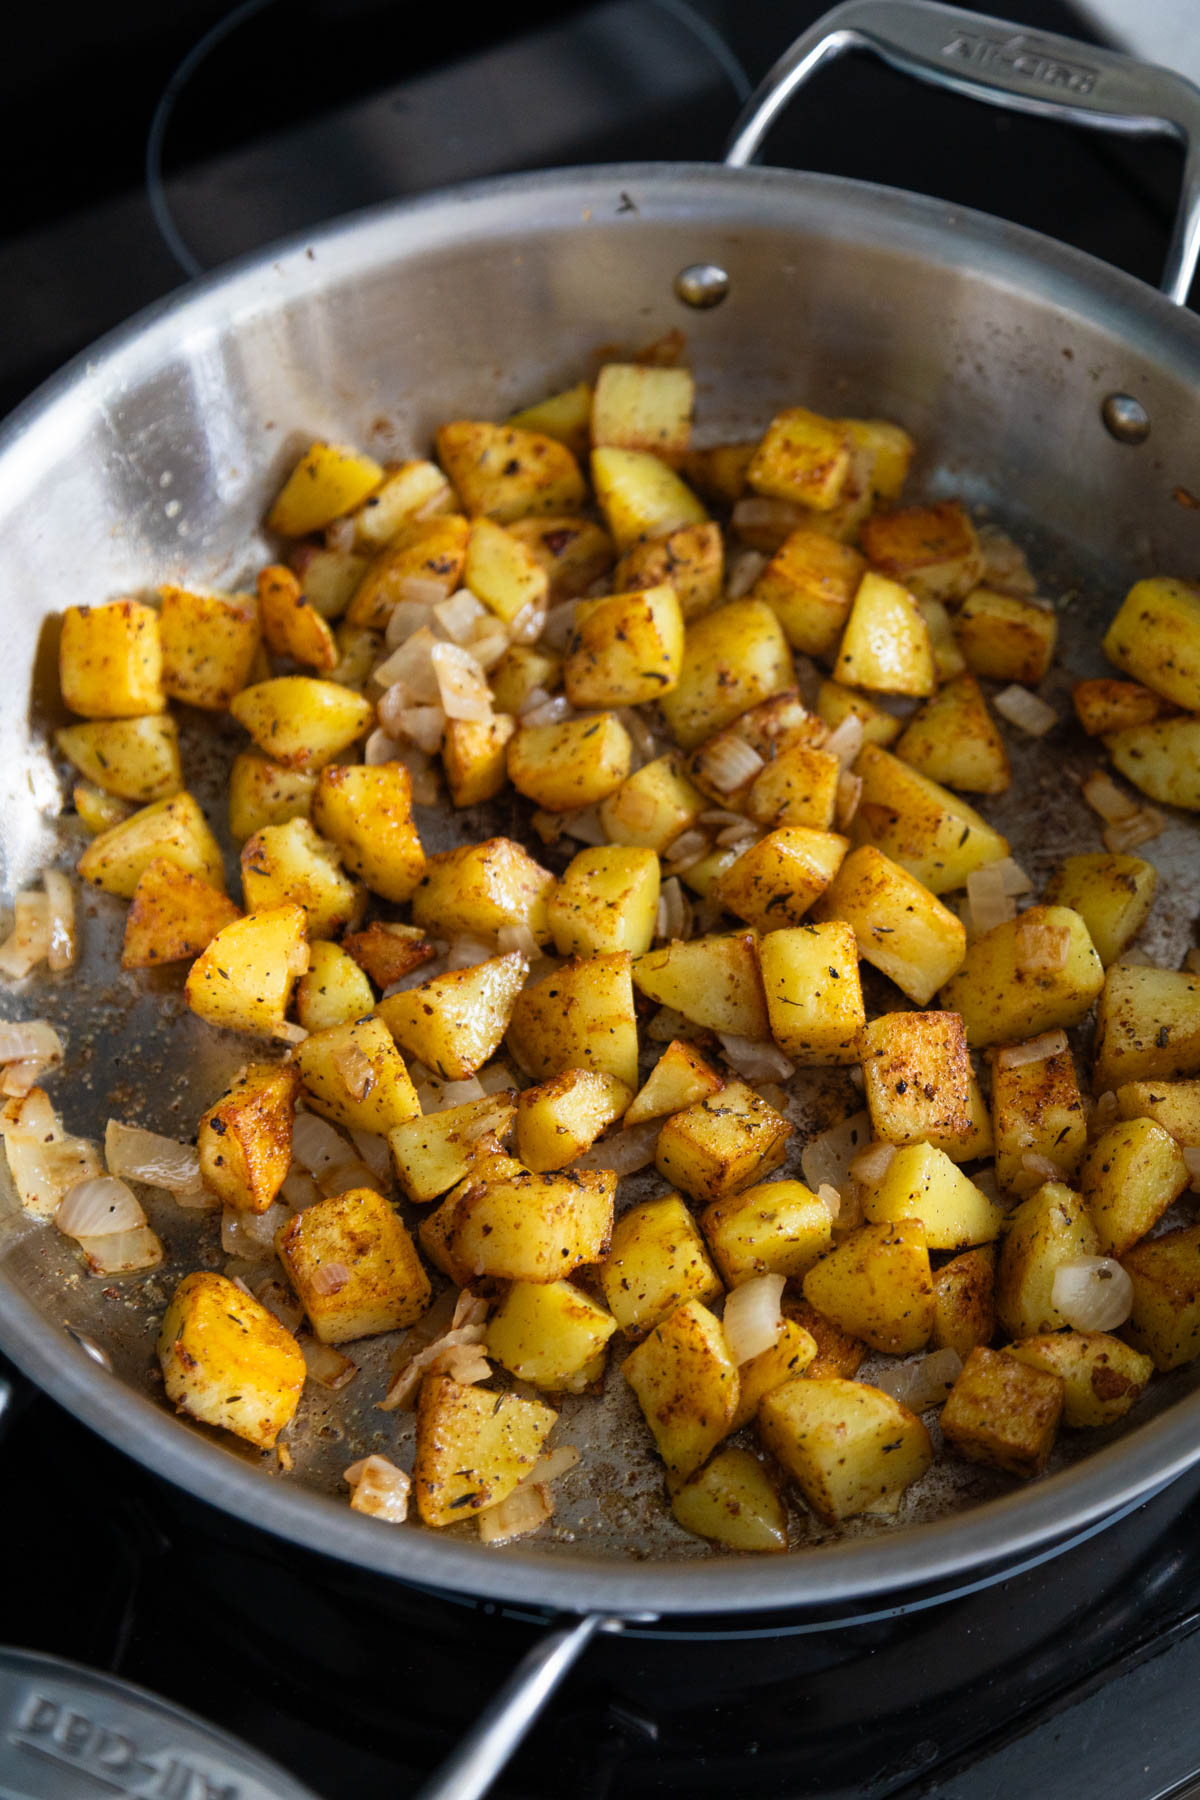 The crispy breakfast potatoes are in a skillet. They are golden brown and you can see the seasonings on top.